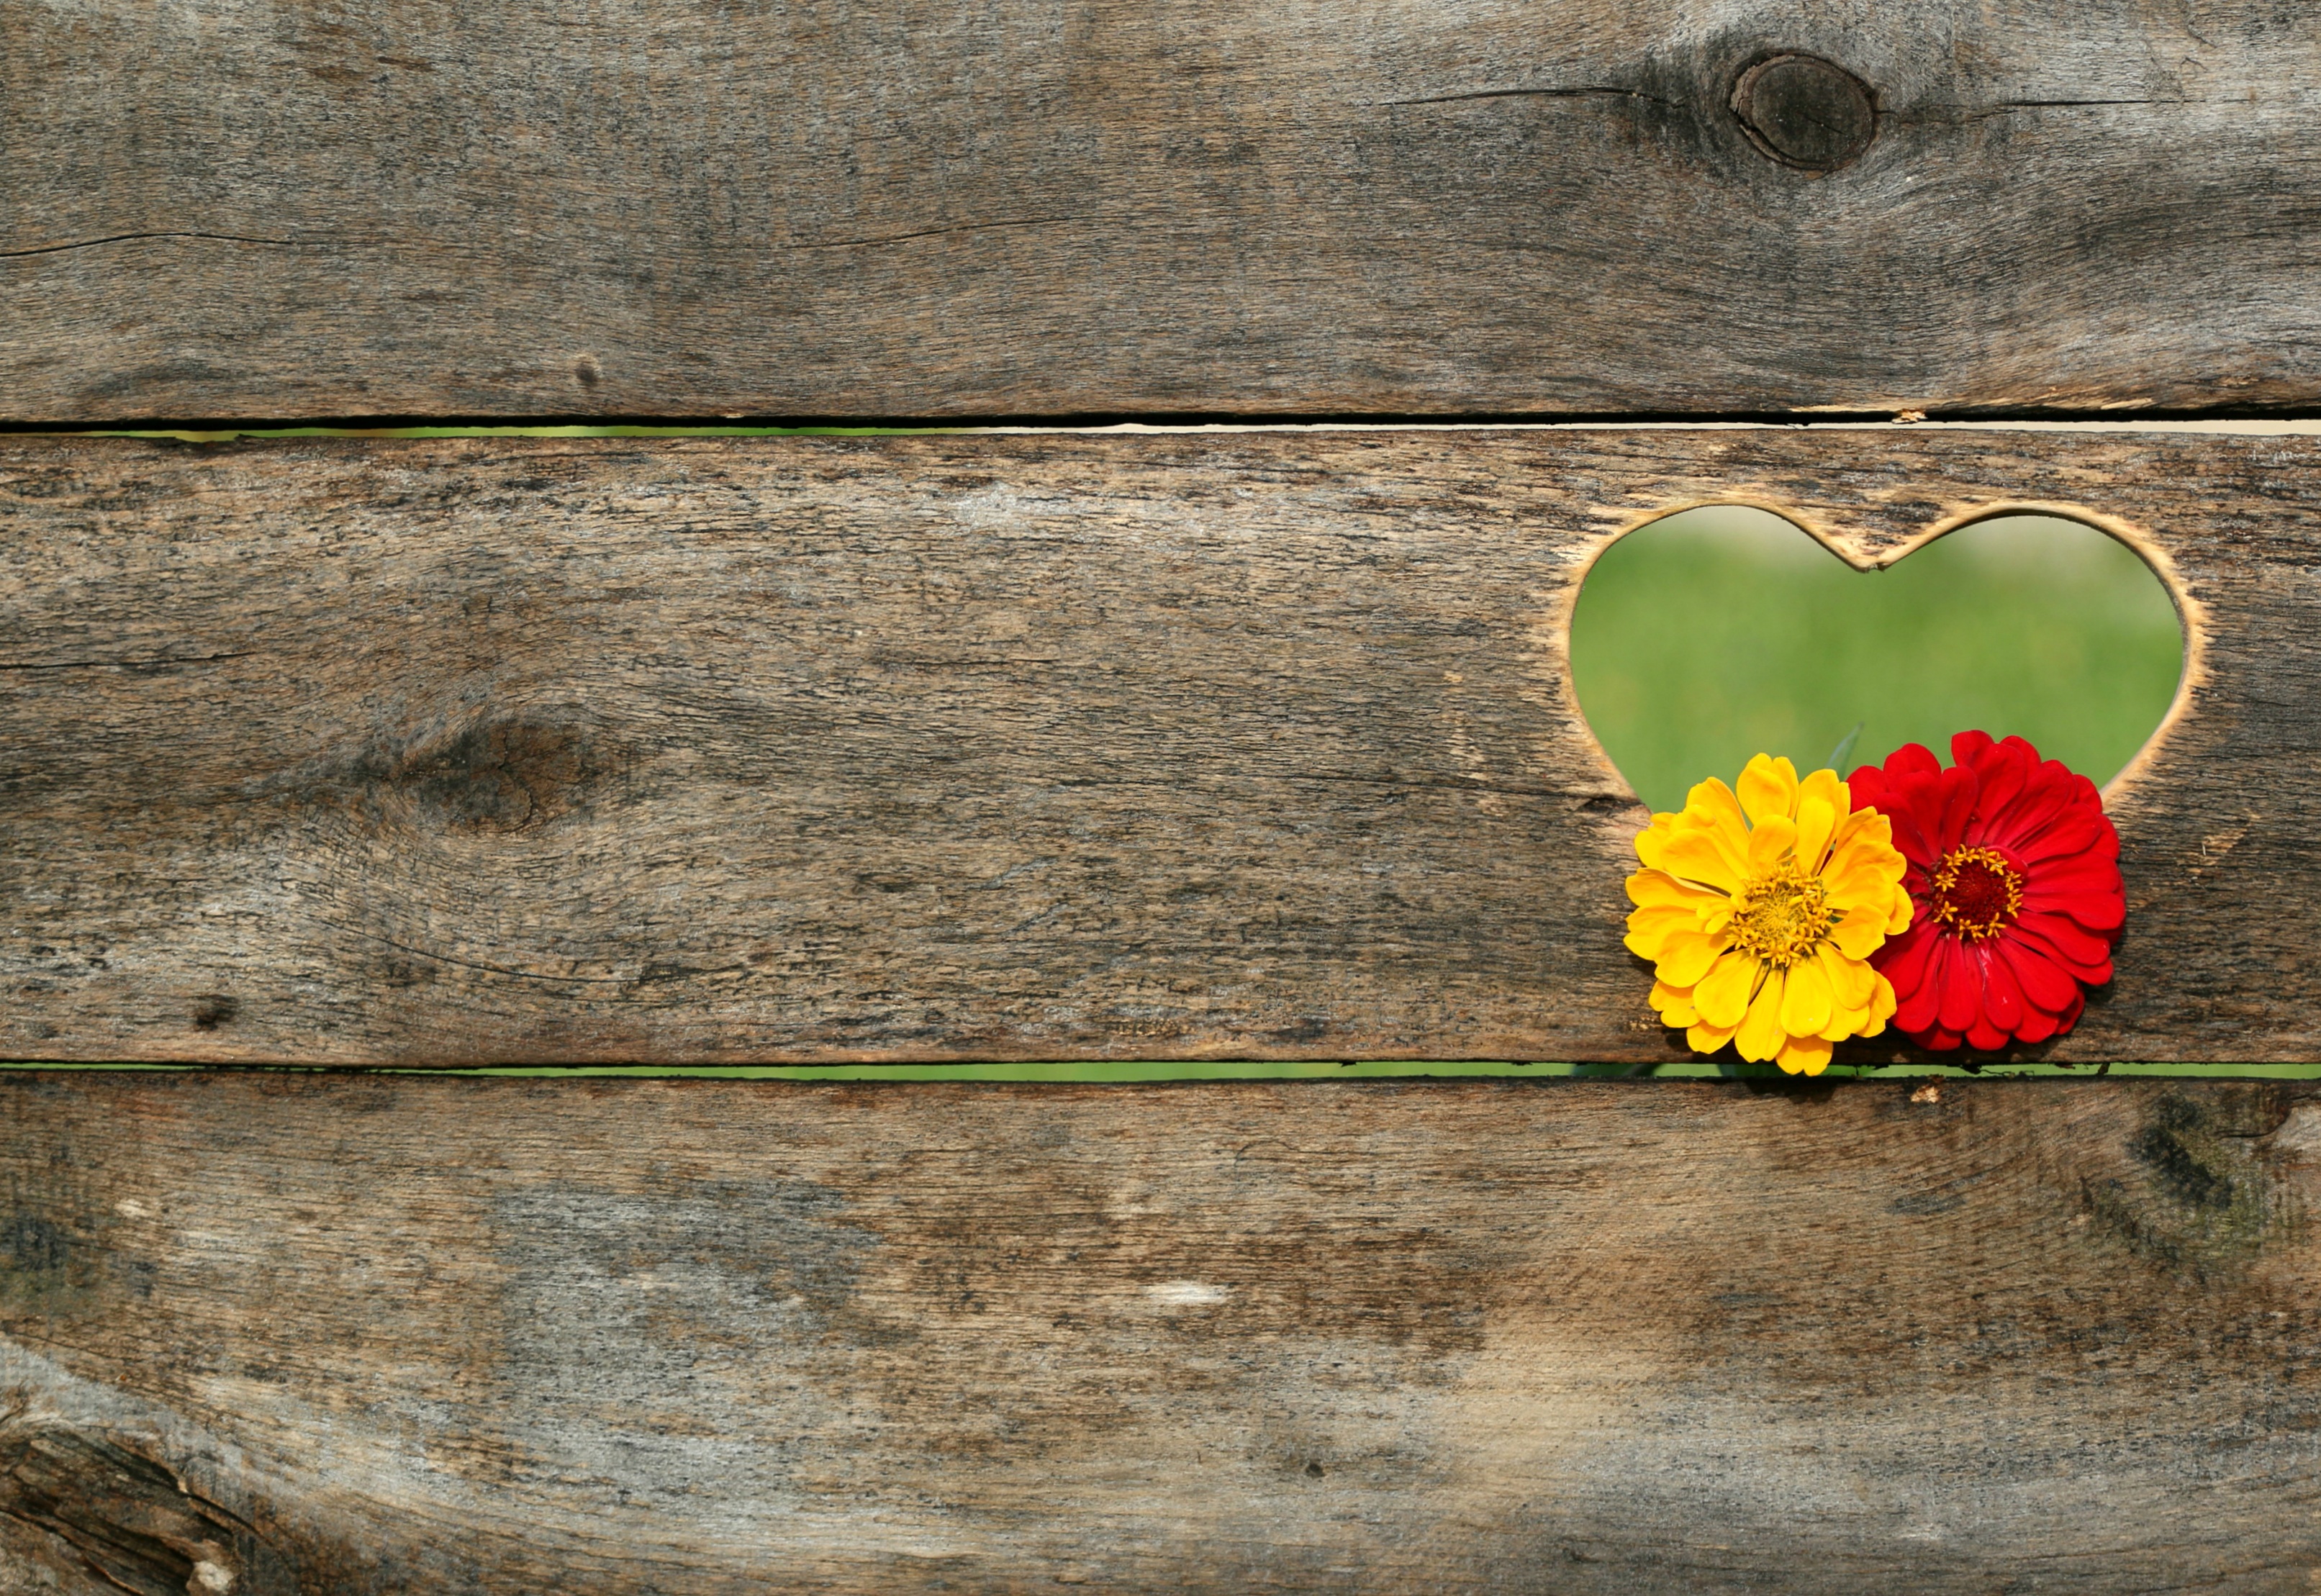 Wooden fence with carved heart with flowers